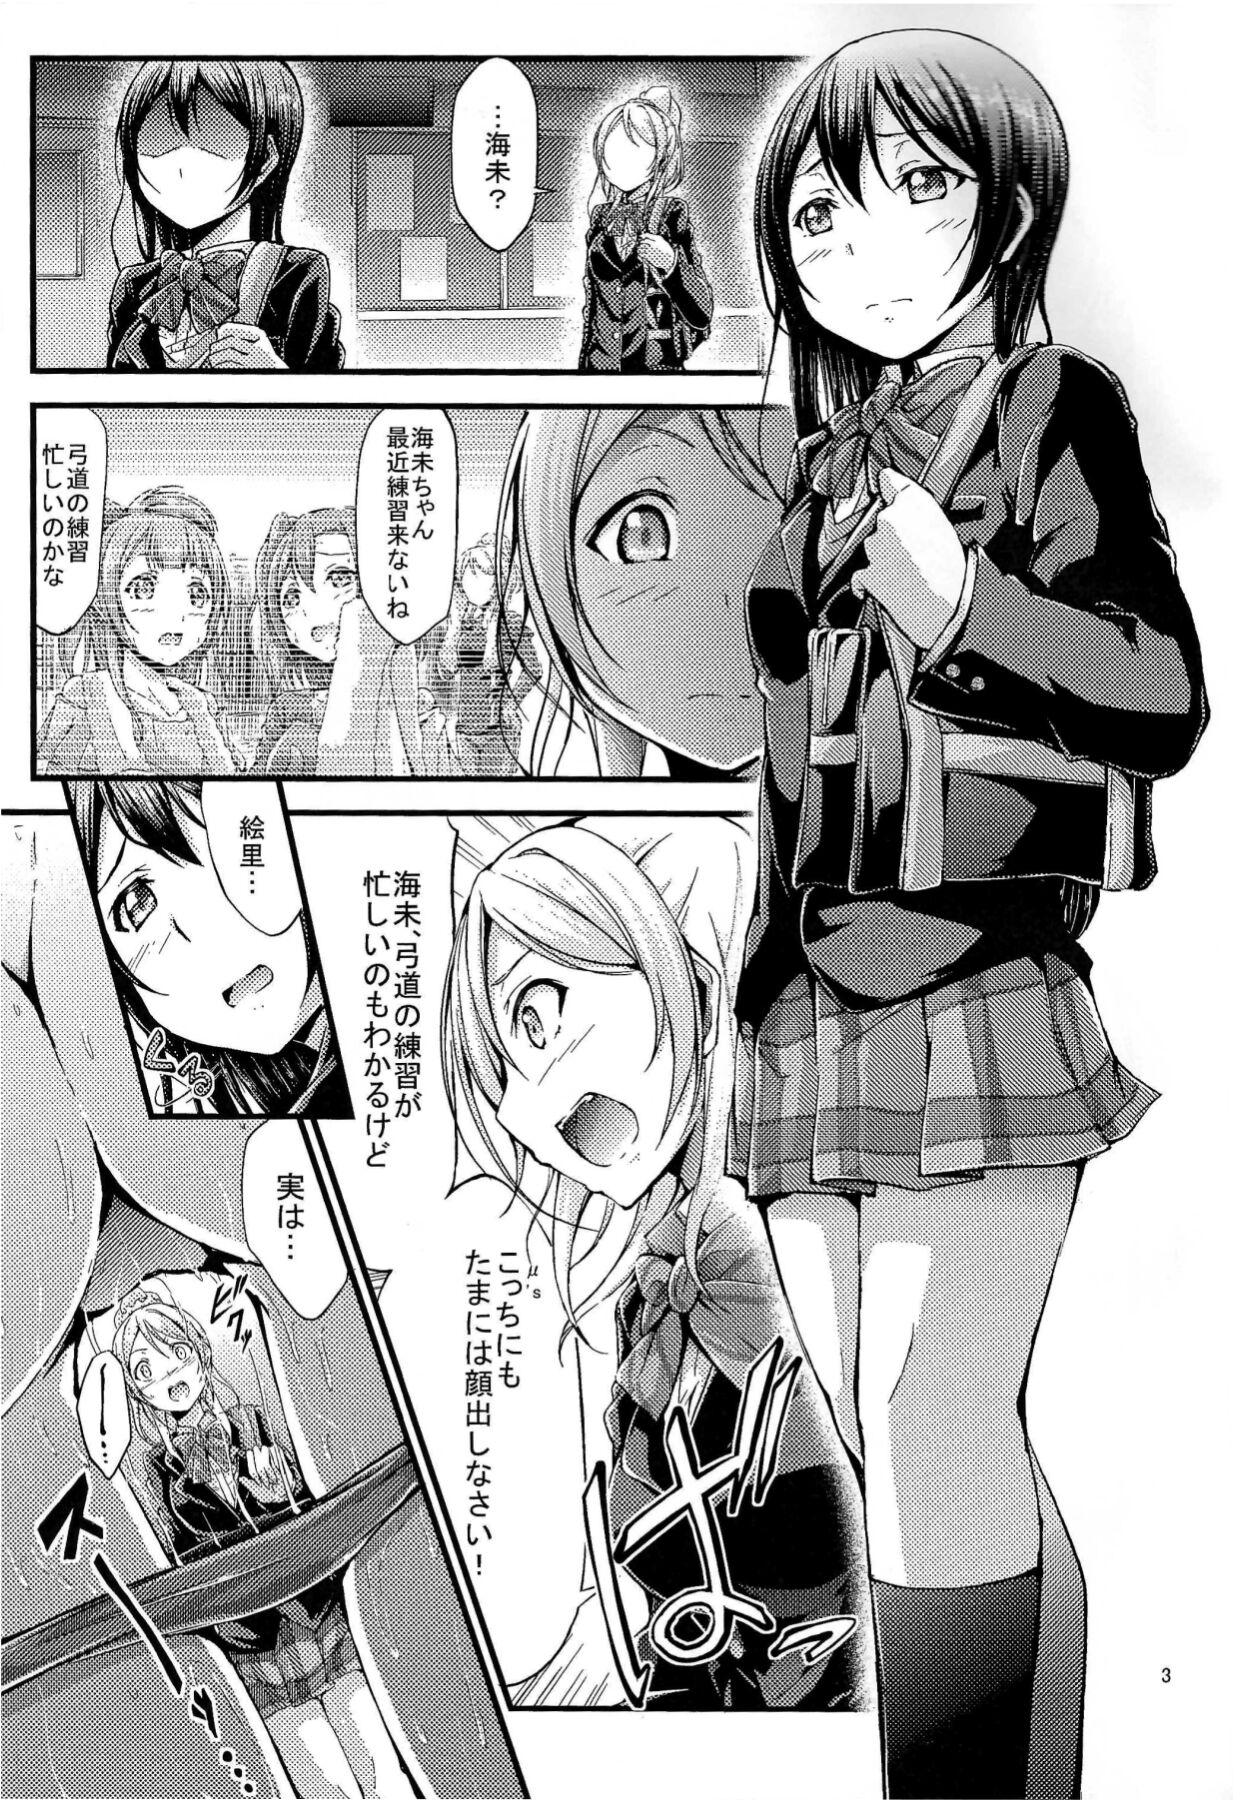 Teentube UMI STORY vol.1 - Love live Roleplay - Page 2